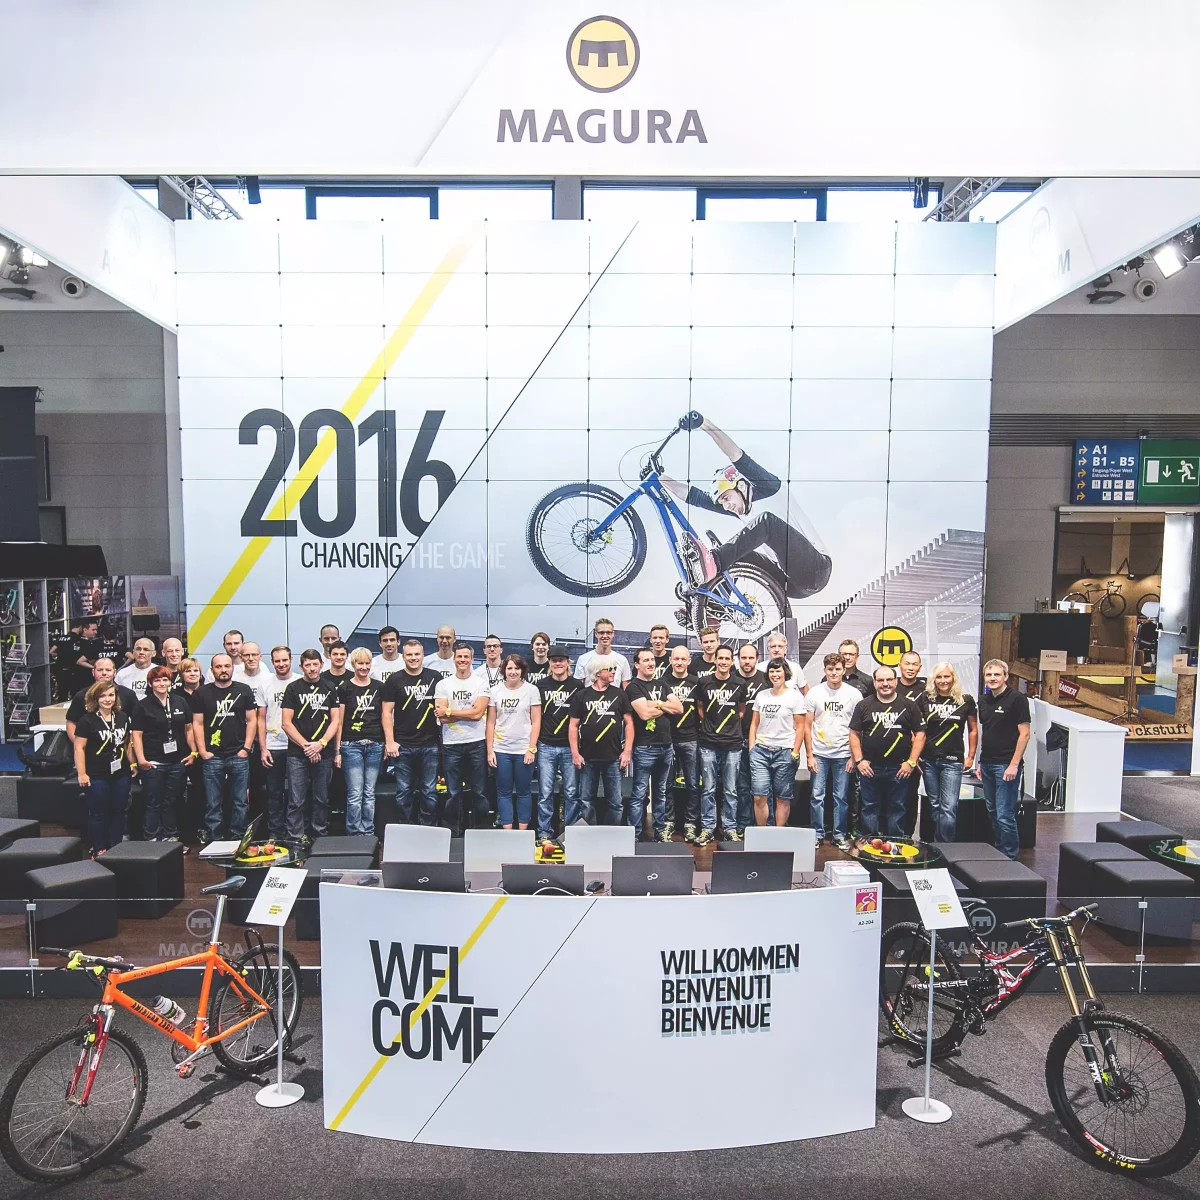 Brand relaunch of Magura at Eurobike 2016